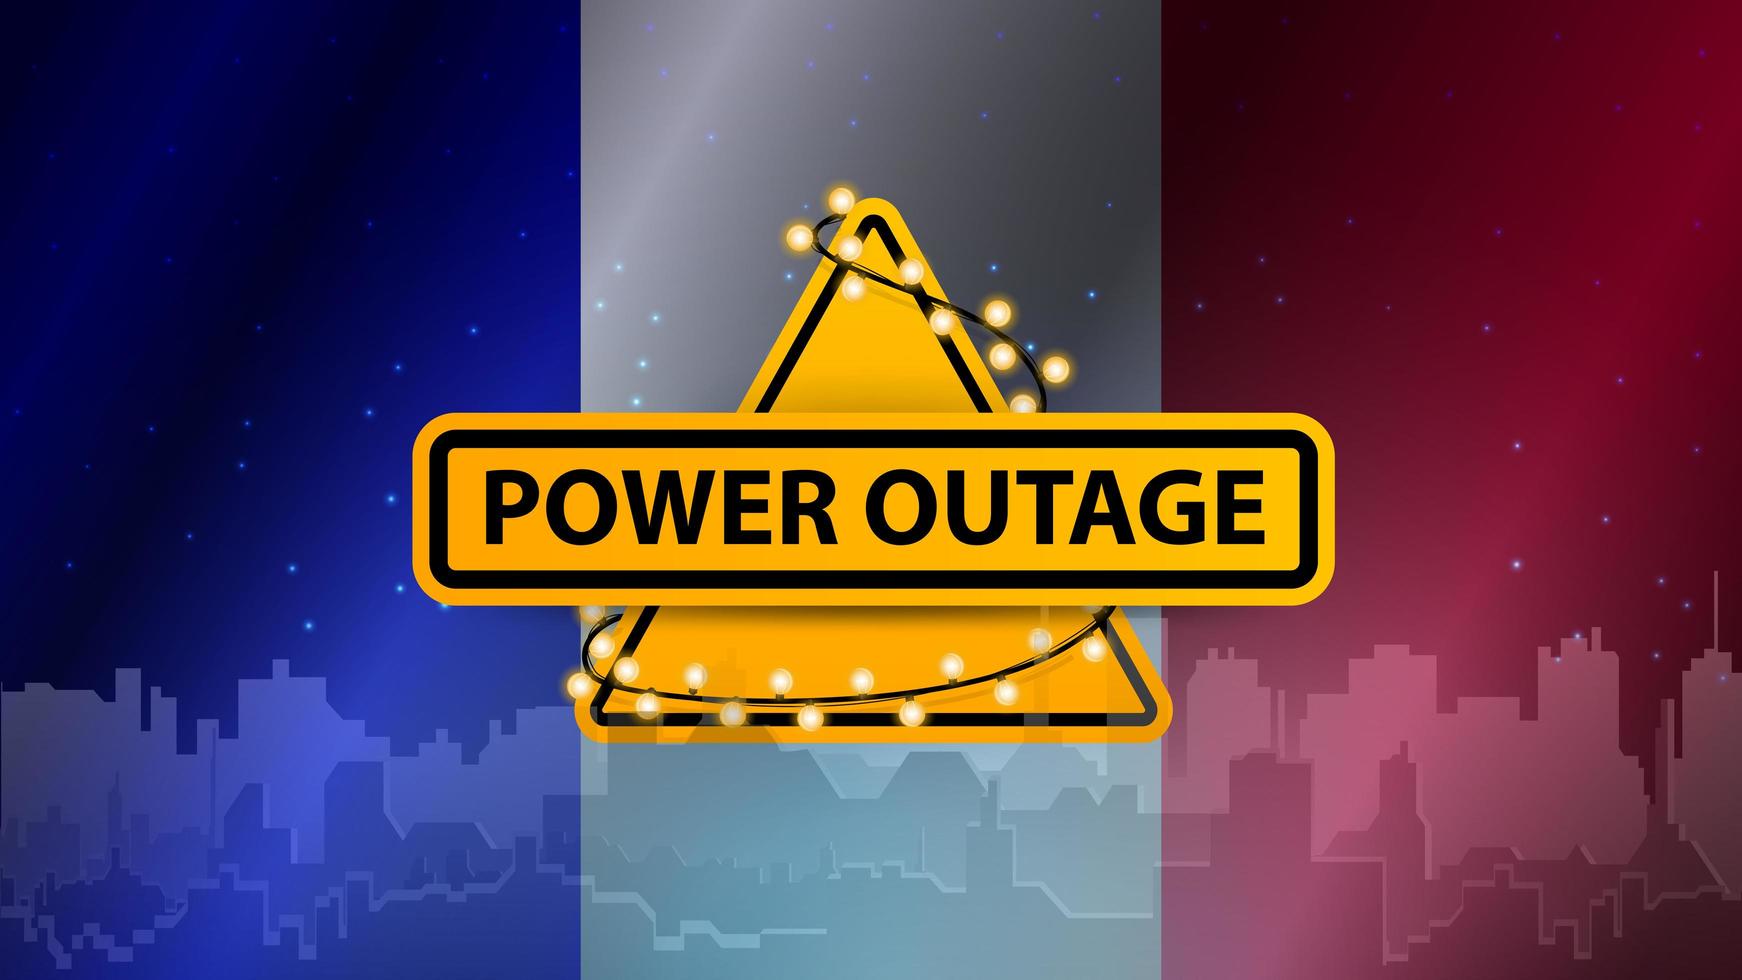 Power outage, yellow warning sign wrapped with garland on the background of the flag of France with the silhouette of the city on the background vector